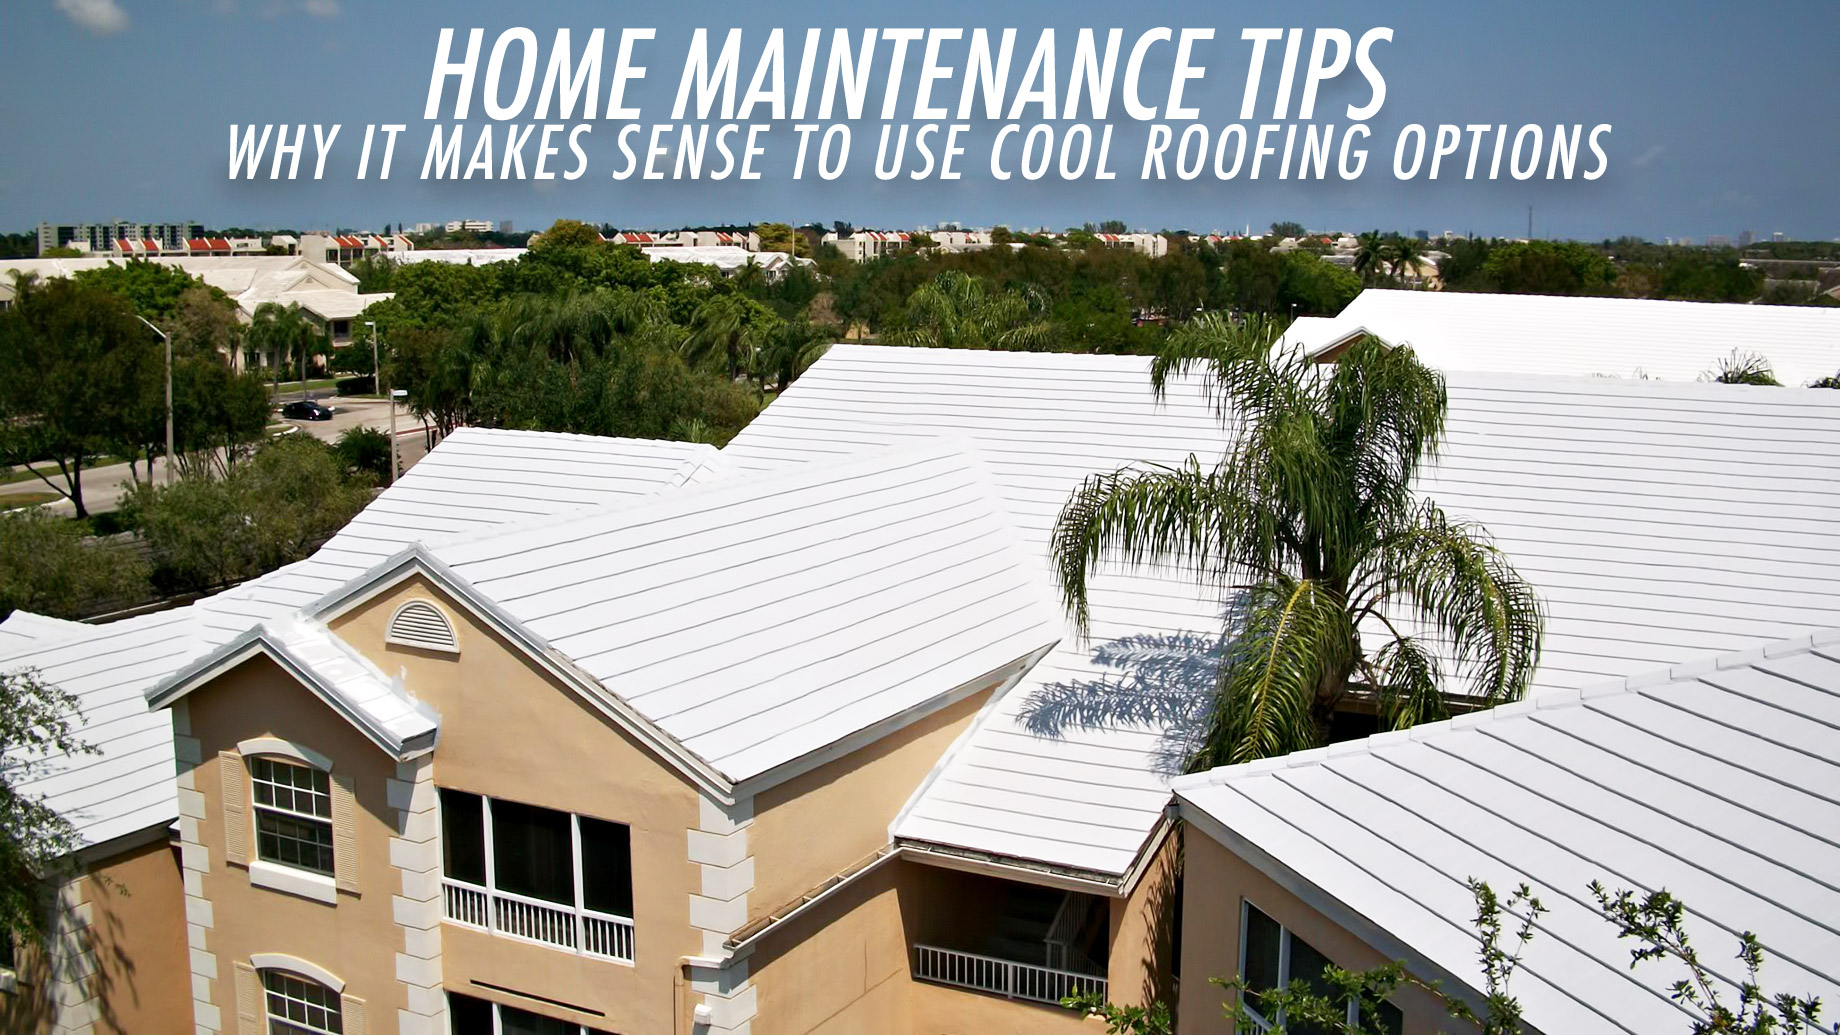 Home Maintenance Tips - Why it Makes Sense to Use Cool Roofing Options